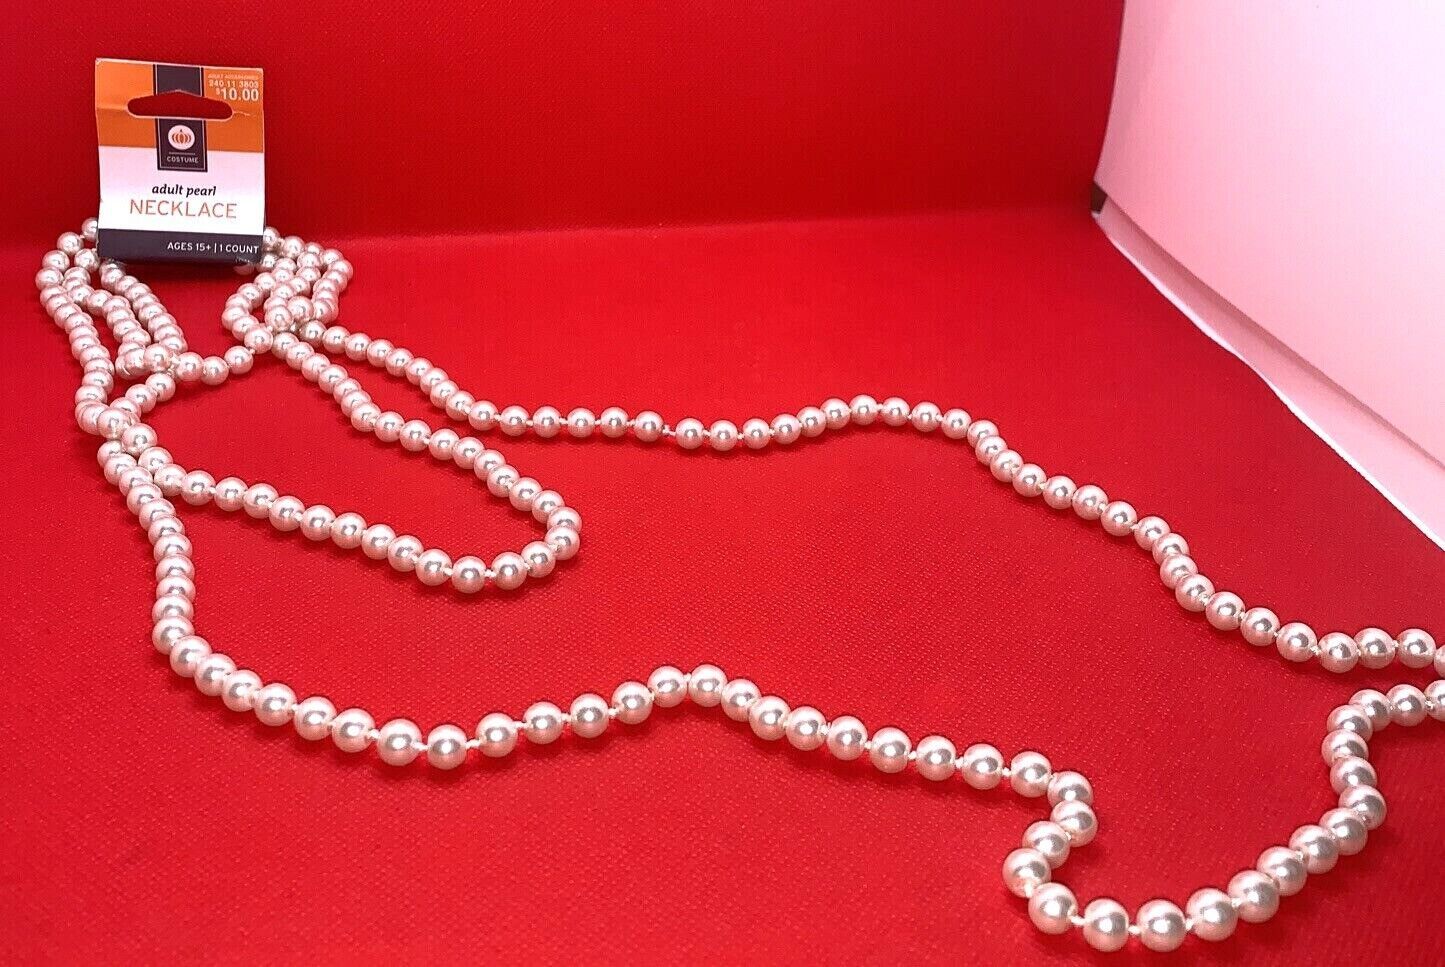 Primary image for Pearl Necklace Adult Costume Fashion Jewelry 240 11 3803